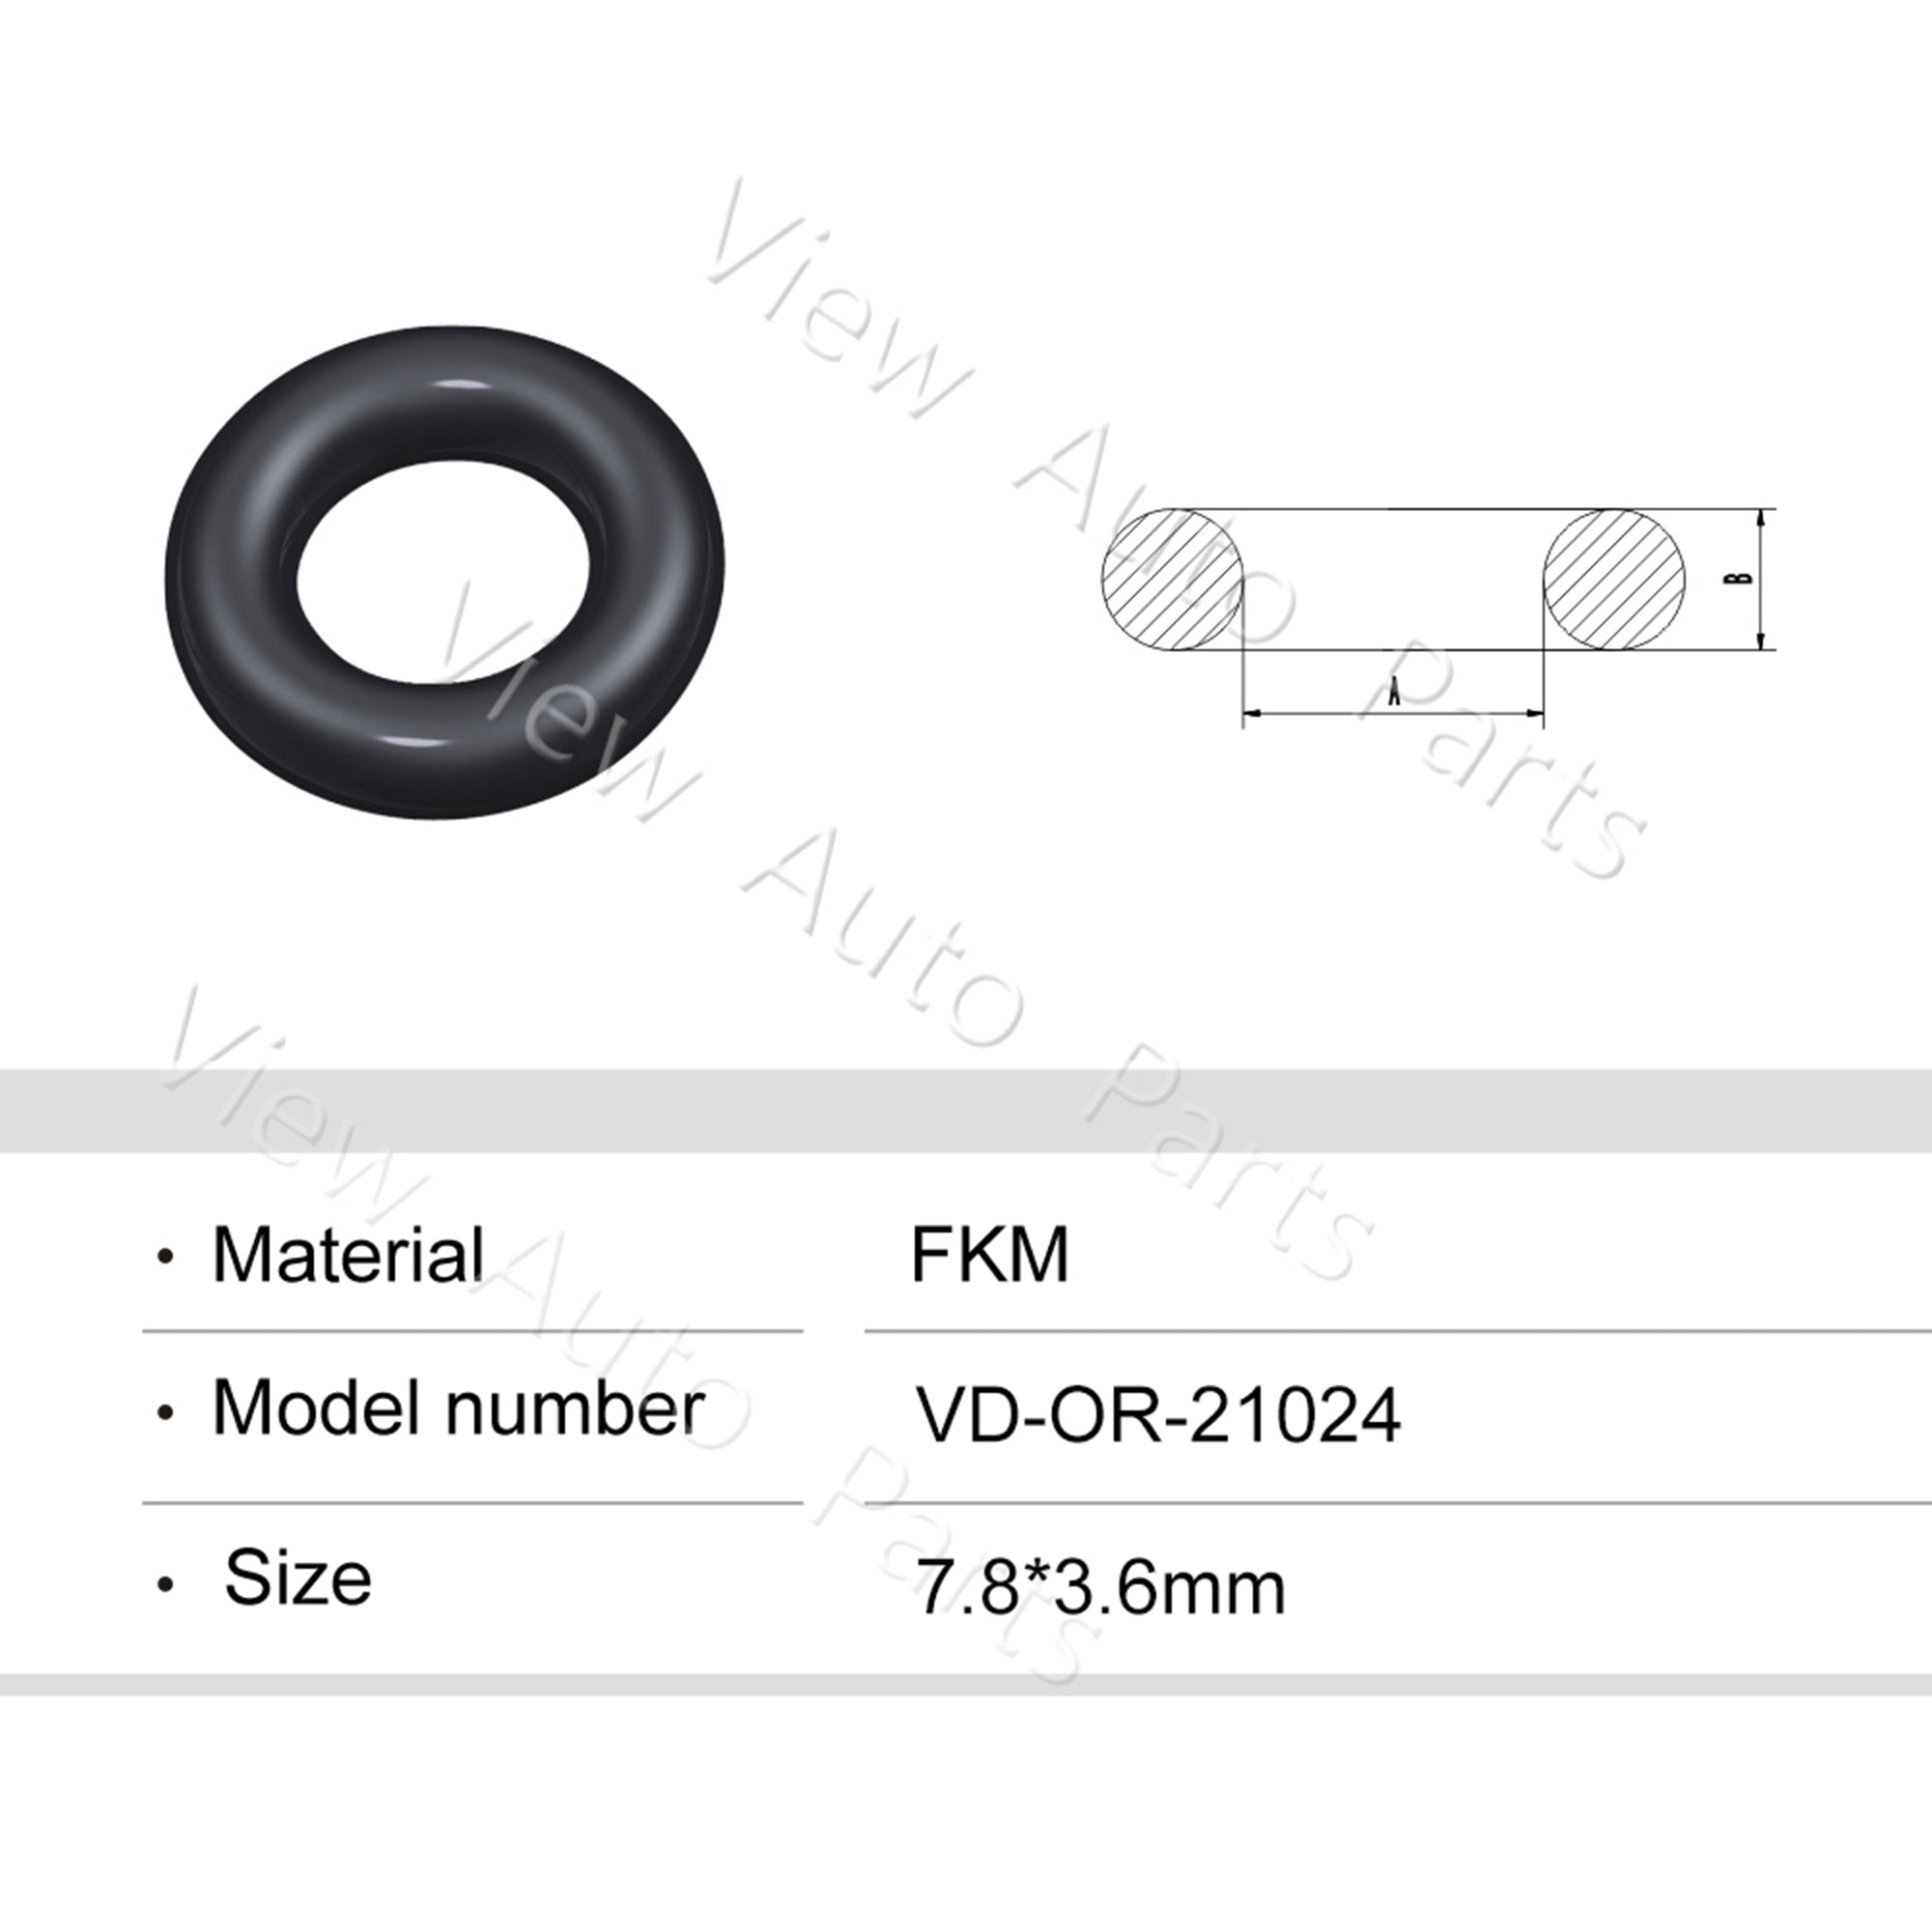 Fuel Injector Rubber Seal Orings for Renaulte Peugeot Denso 280158034 Fuel Injector Repair Kits FKM & Rubber Heat Resistant, Size: 7.8*3.6mm OR-21024